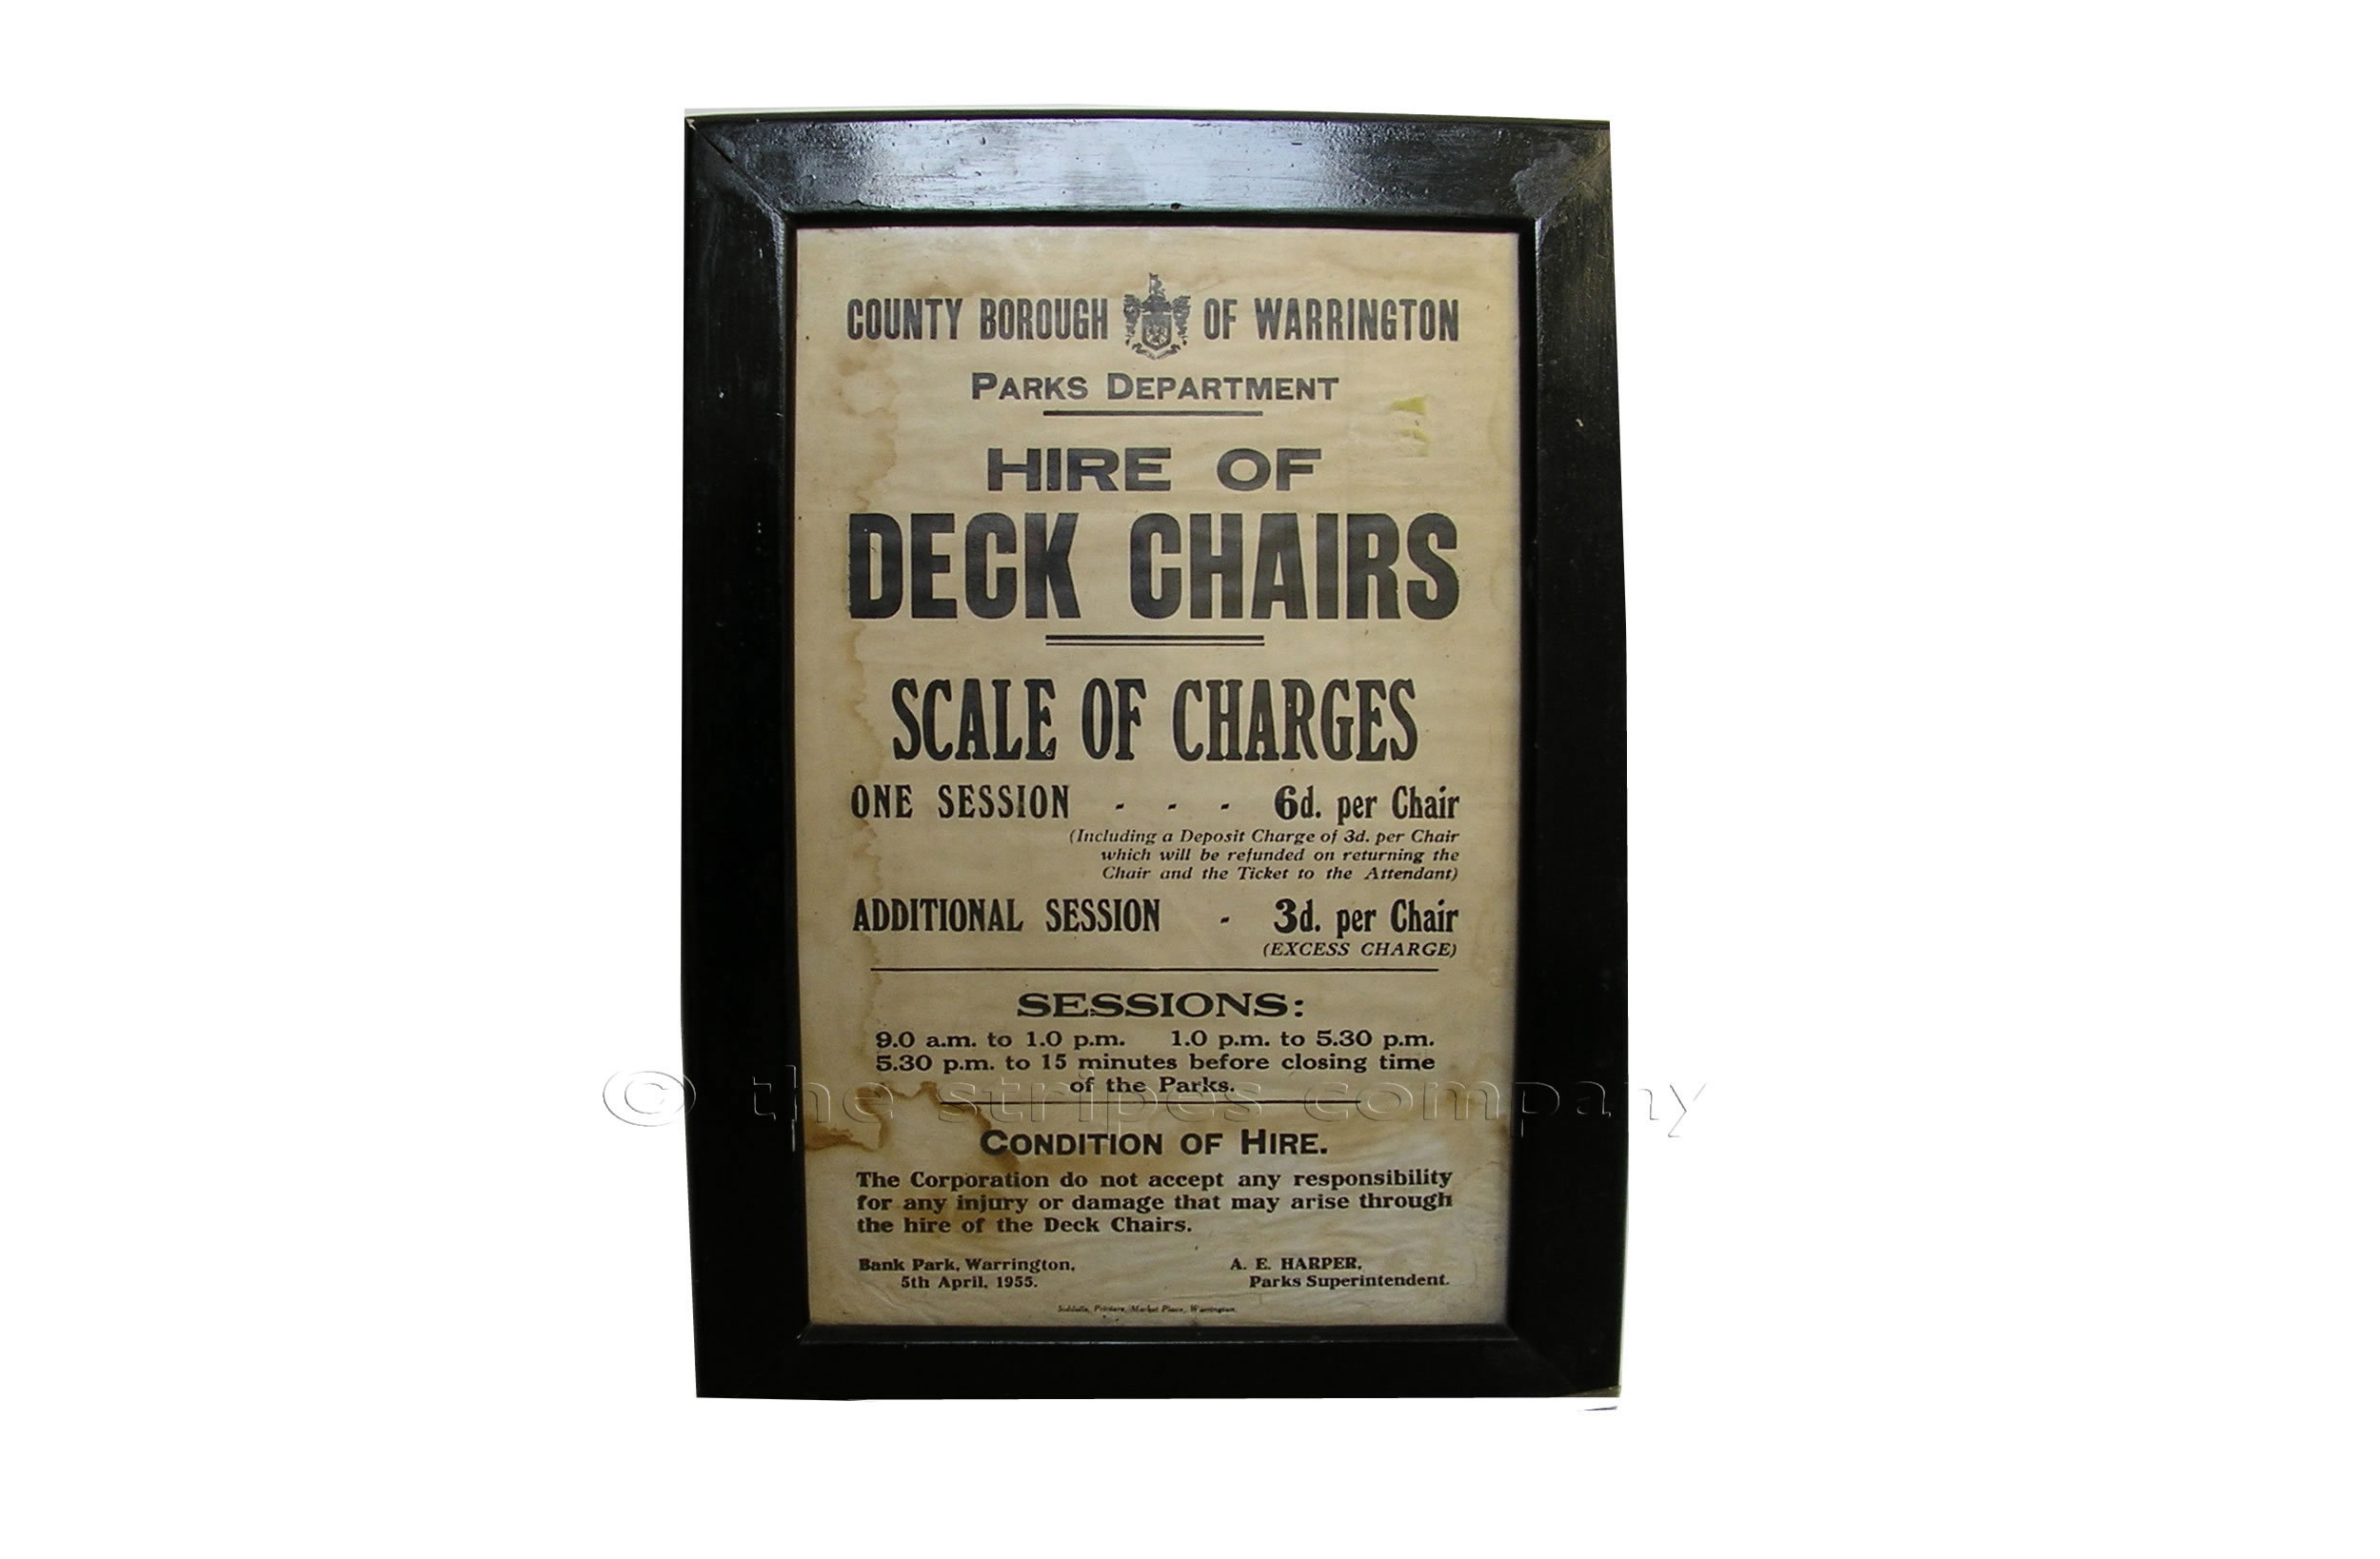 Deckchair Posters| Deckchairs for Hire Poster| Hire of Deck Chairs Posters